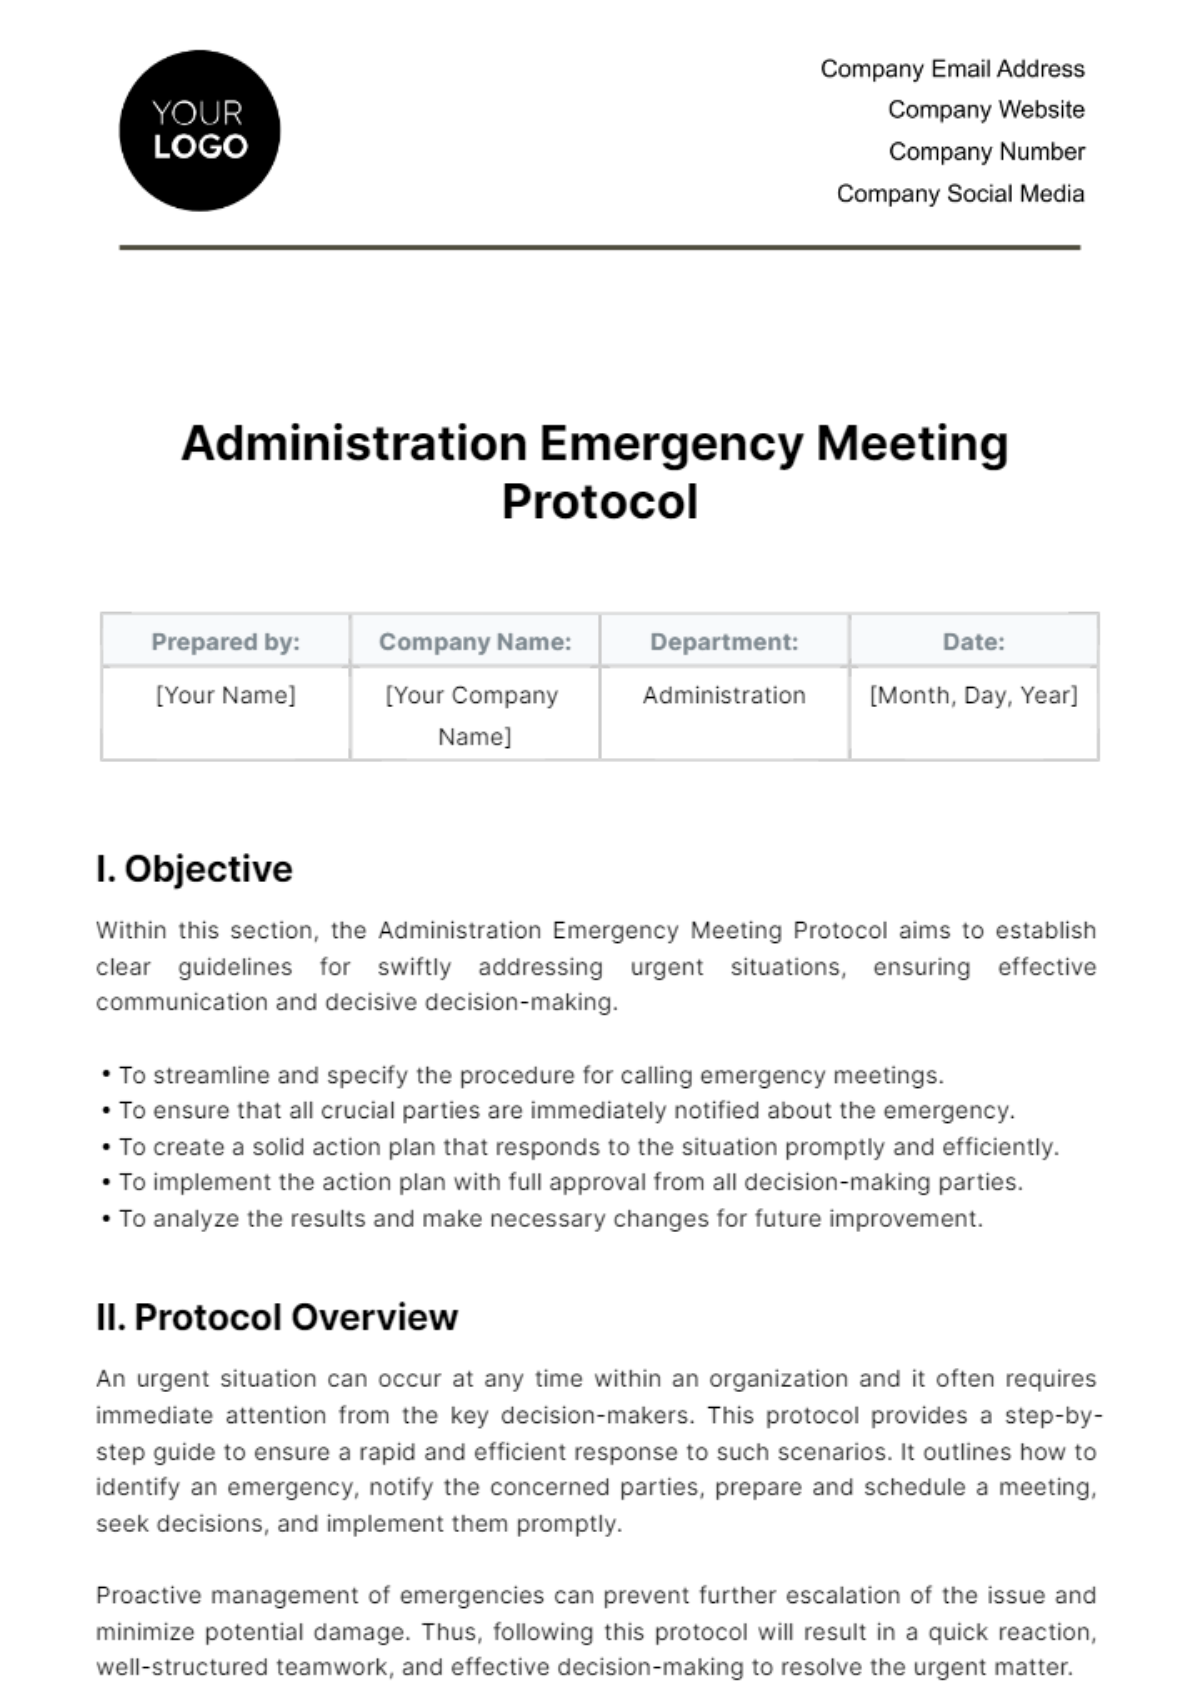 Administration Emergency Meeting Protocol Template